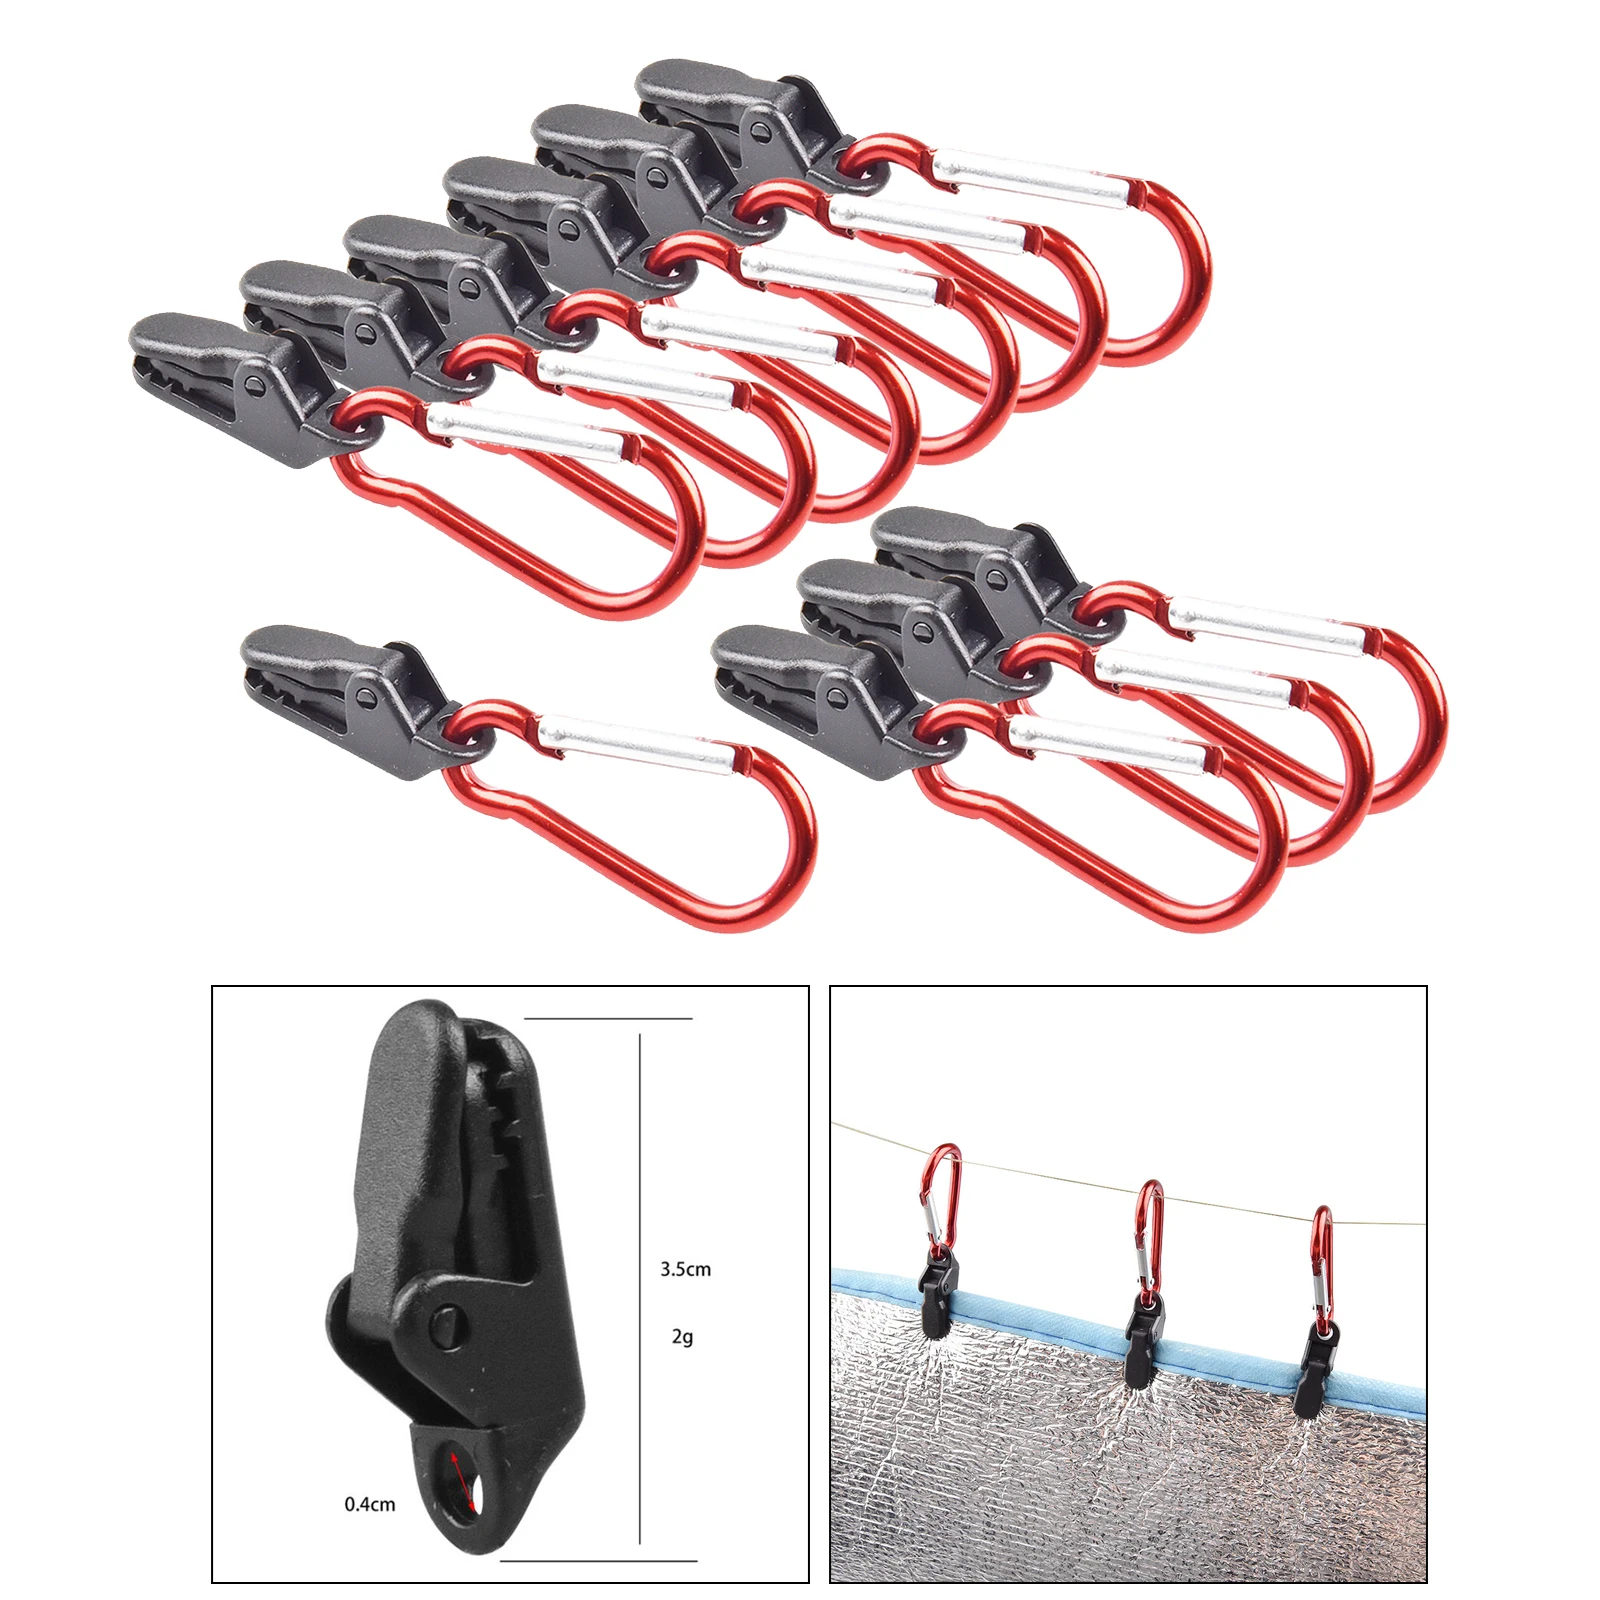 10x Tent Tarp Clamp Clip with D-Shaped Carabiners Durable Plastic Tarp Clips Lock Tent for Camping Hiking Field Hunting